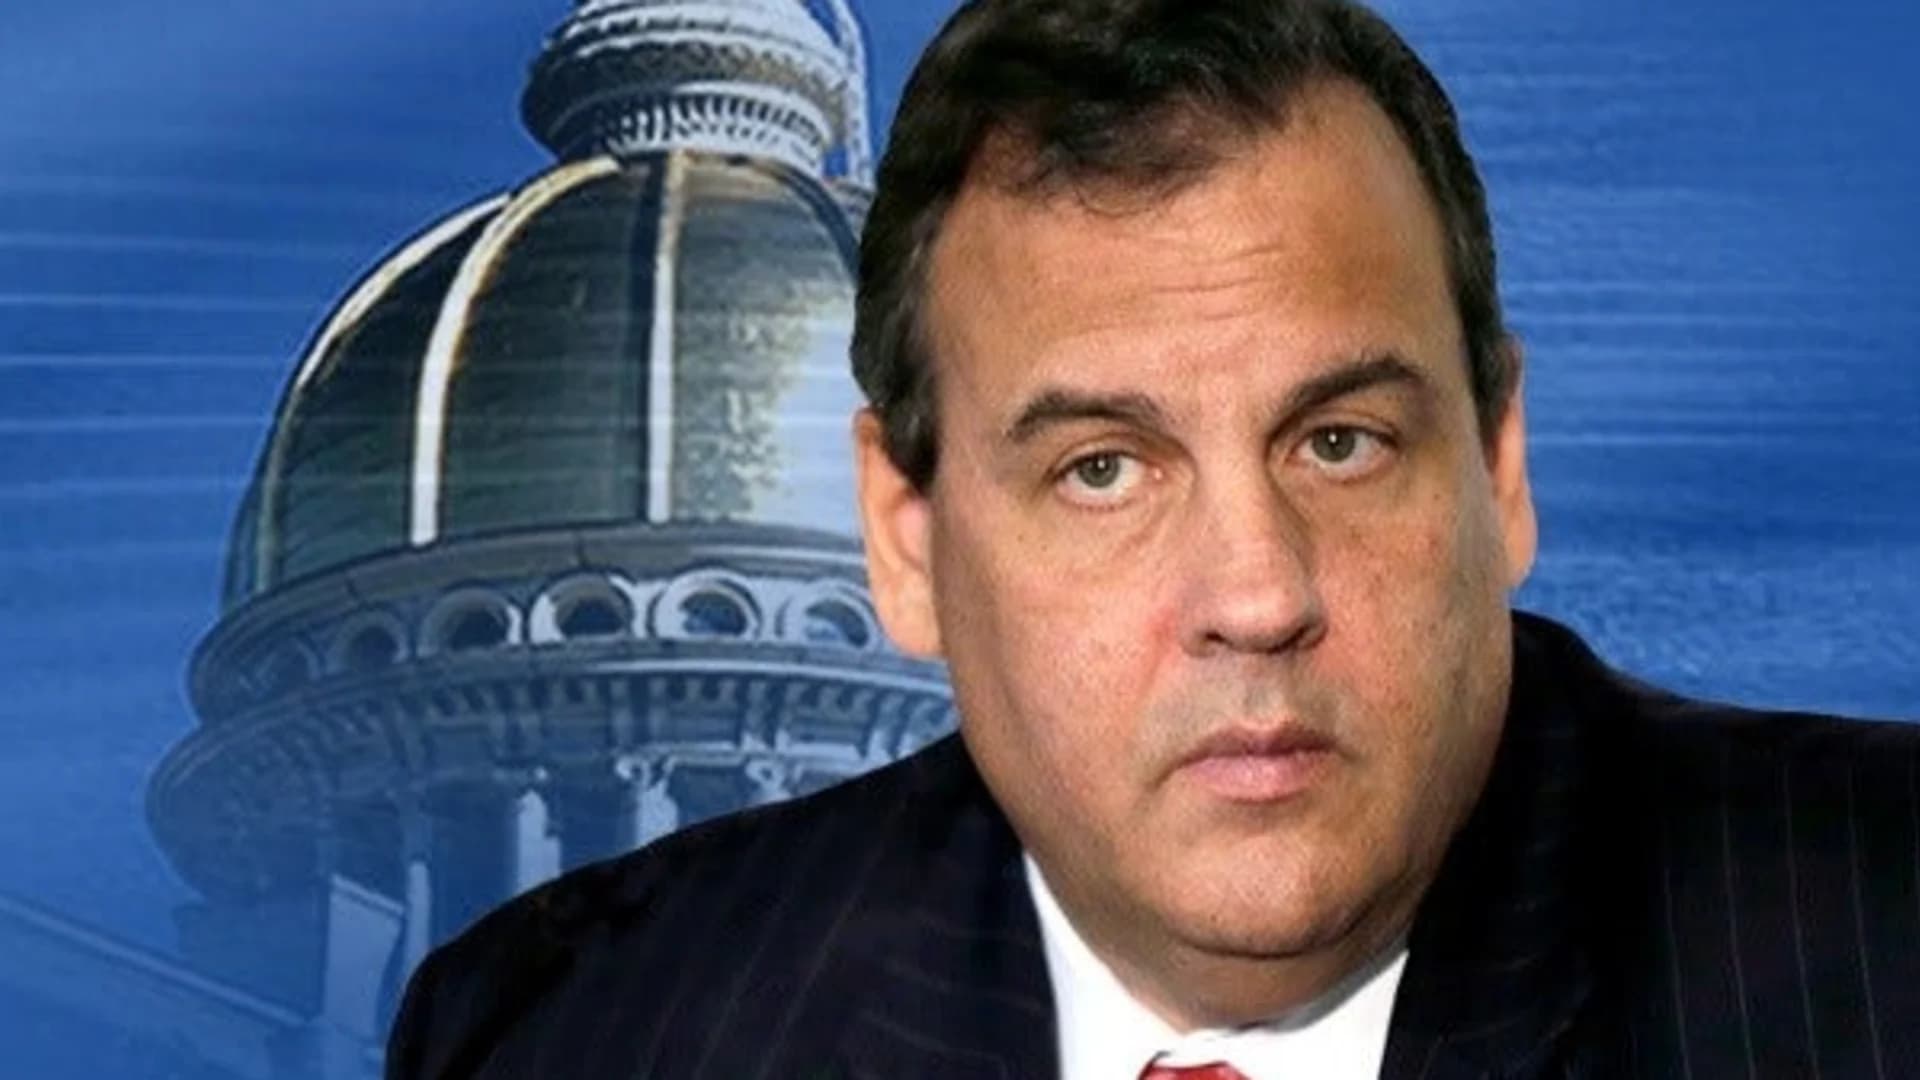 Gov. Chris Christie turns up in pages of the new Trump book